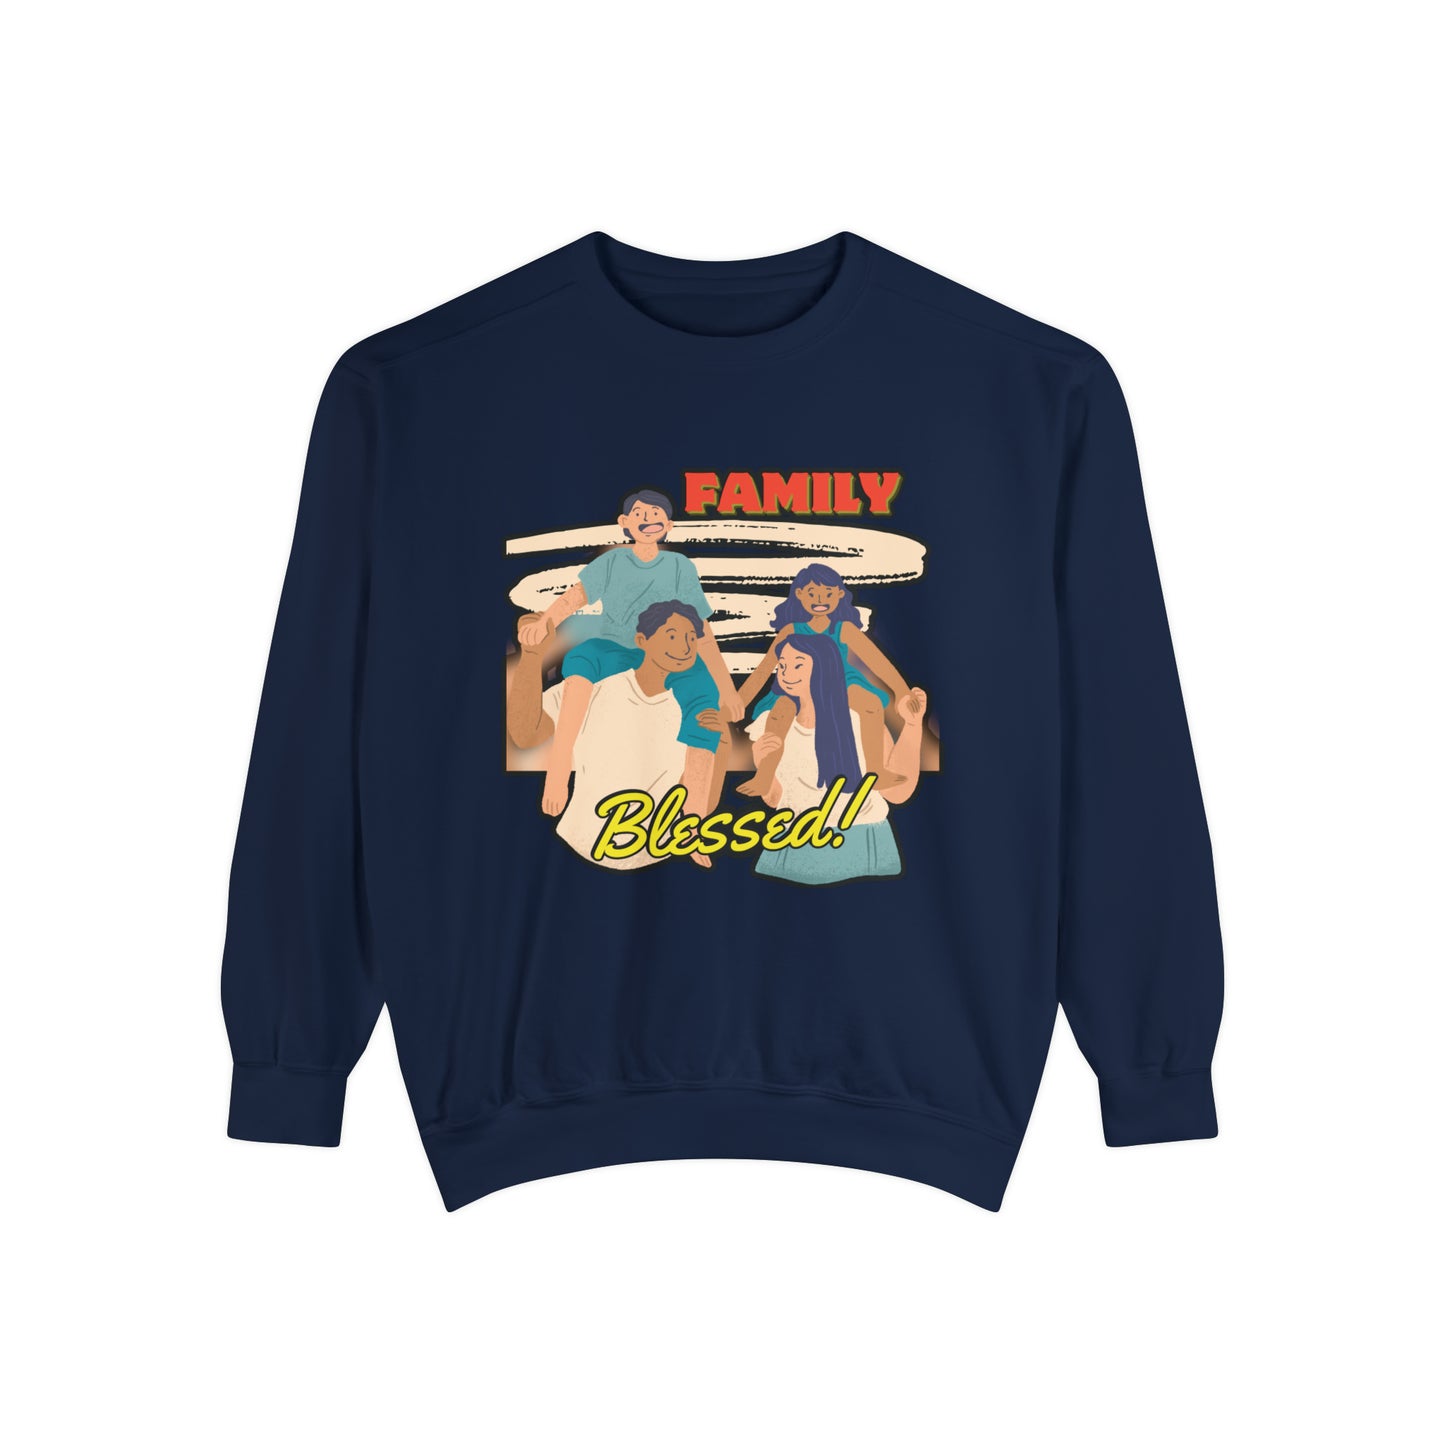 Family Unity: Must-Have Family Blessed Unisex Garment-Dyed Sweatshirt for Cherished Moments!